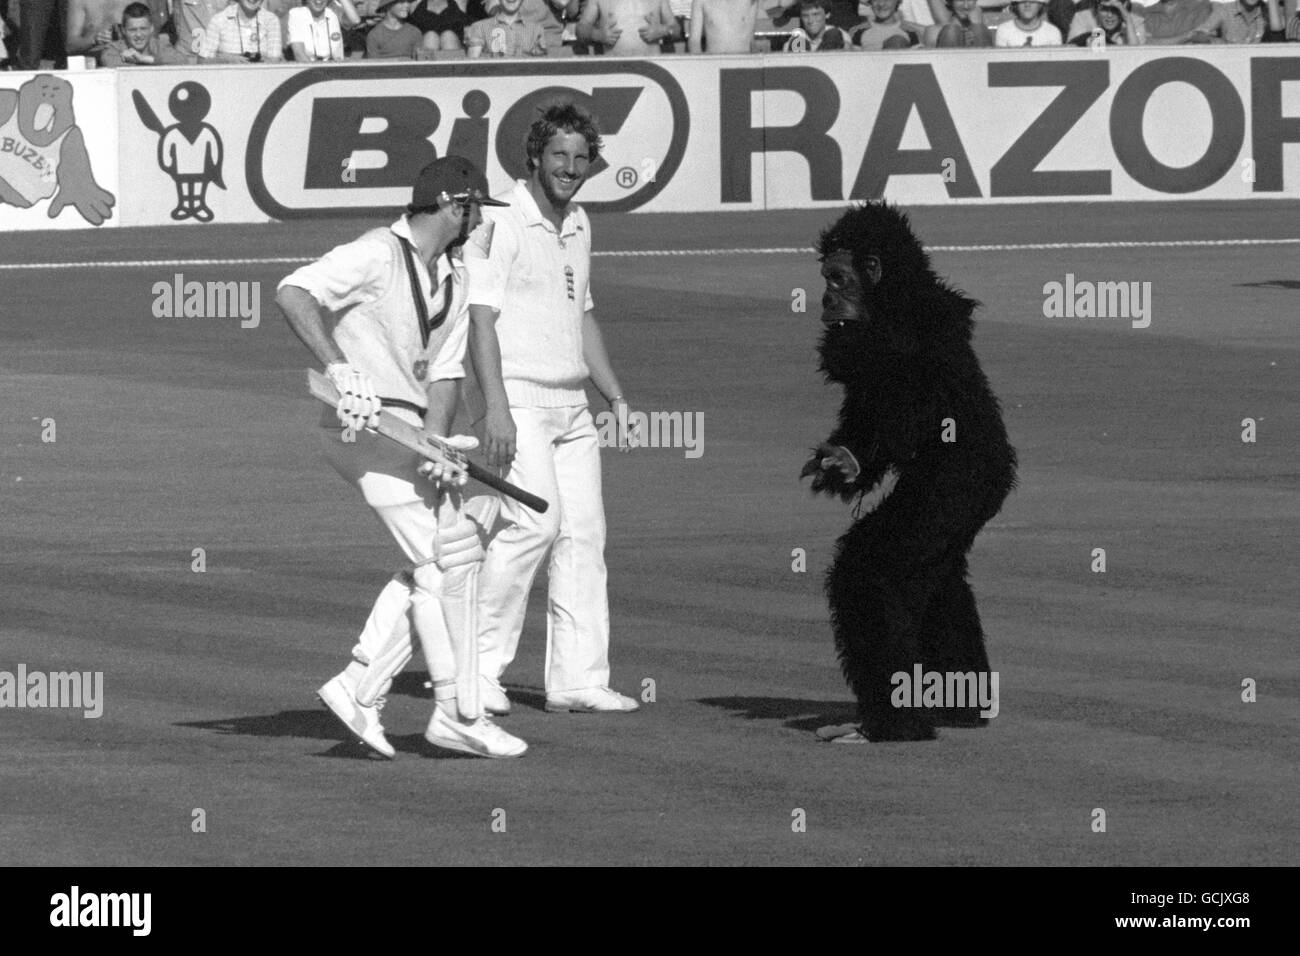 England's Ian Botham nicknamed 'Guy the Gorilla' after a fancy dress stunt, sees the joke as Australian batsman Graham Yallop tries to fend off a youth dressed as a Gorilla who ran on to the pitch. To the crowds delight the Gorilla ignored Graham Yallop and shook hands with Ian Botham. Stock Photo